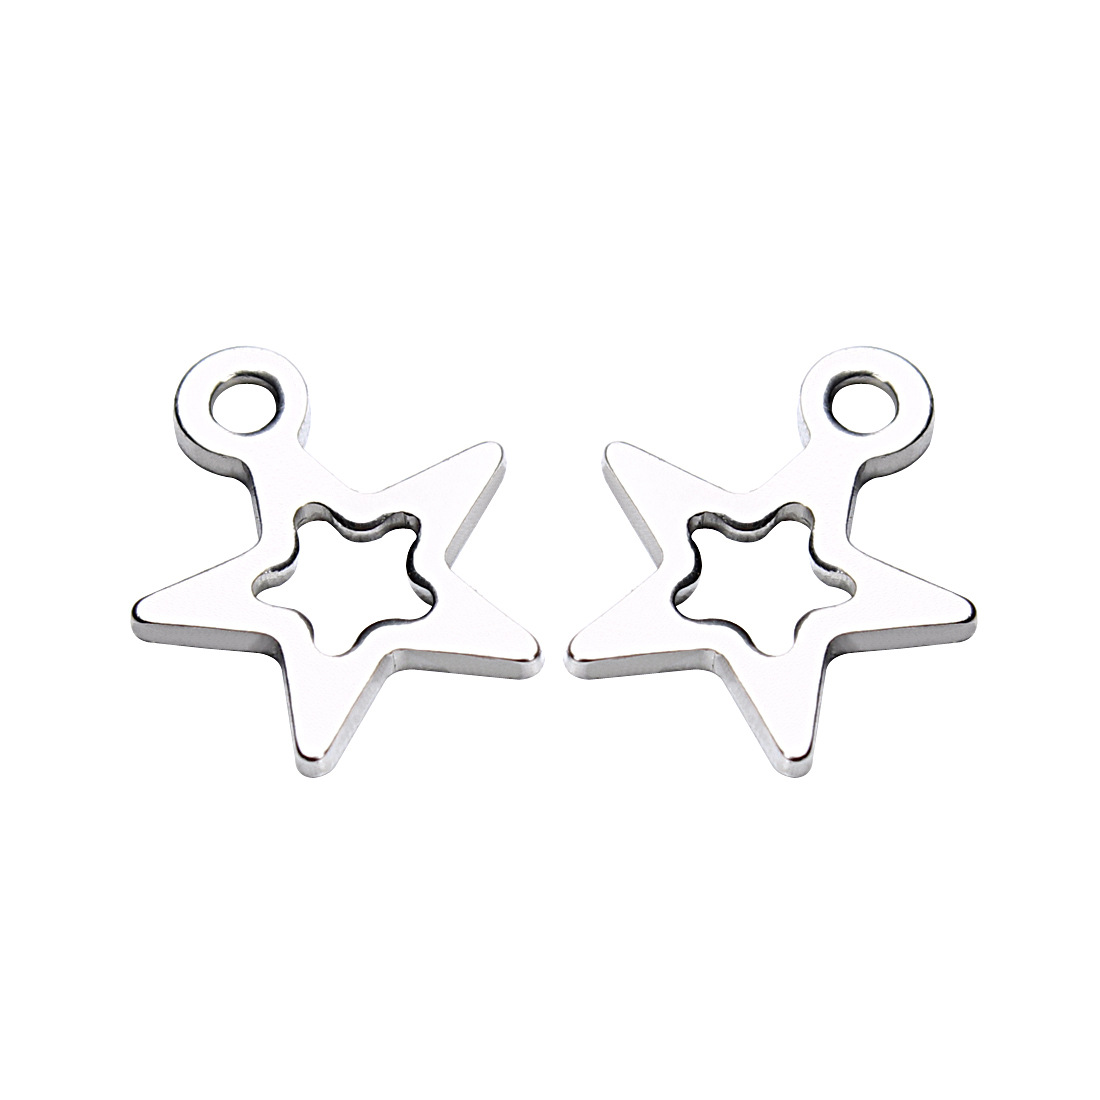 4:Five-pointed star, 8x10mm